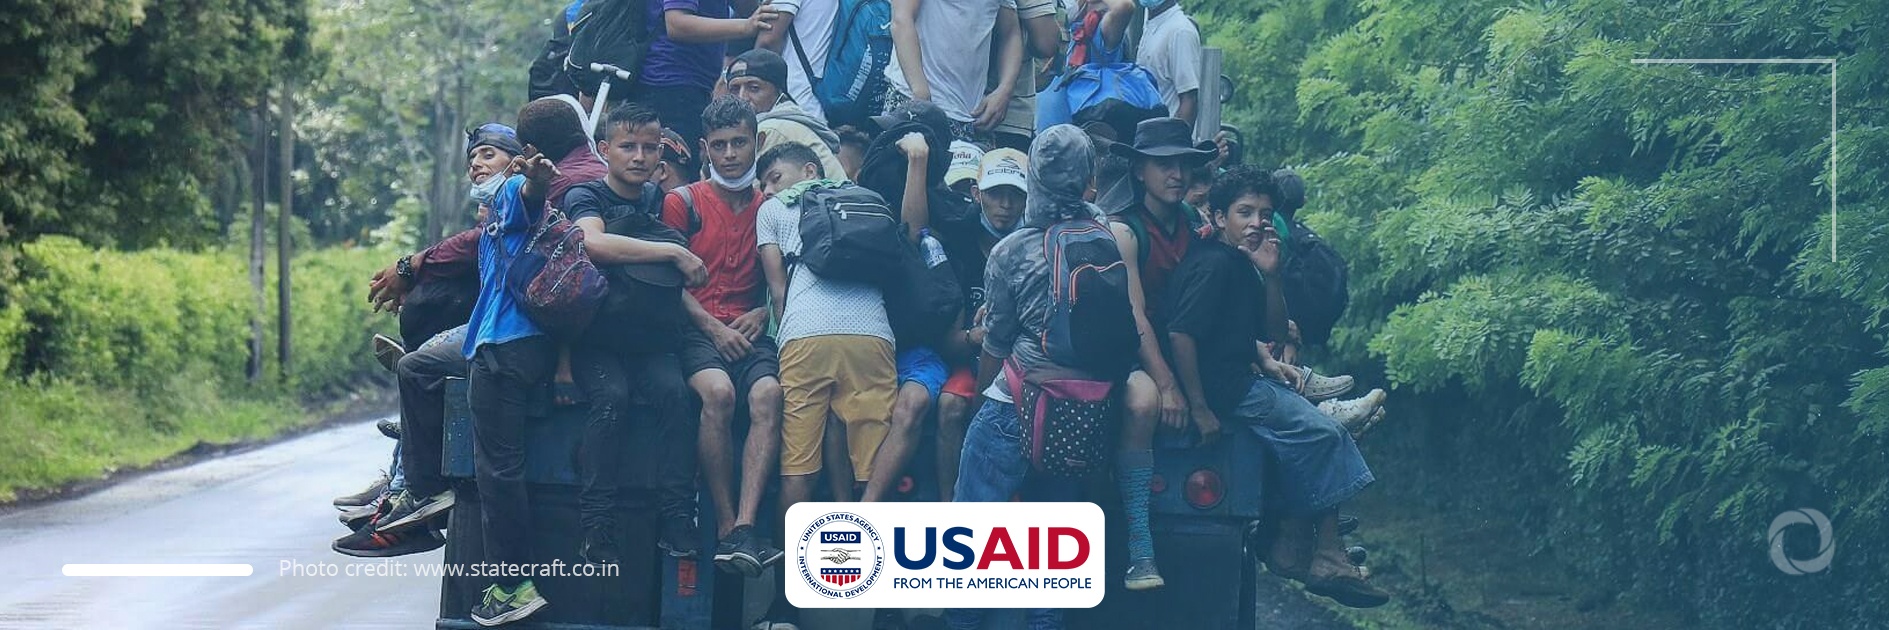 USAID to allocate US$24 million to Honduras in a bid to curb migration